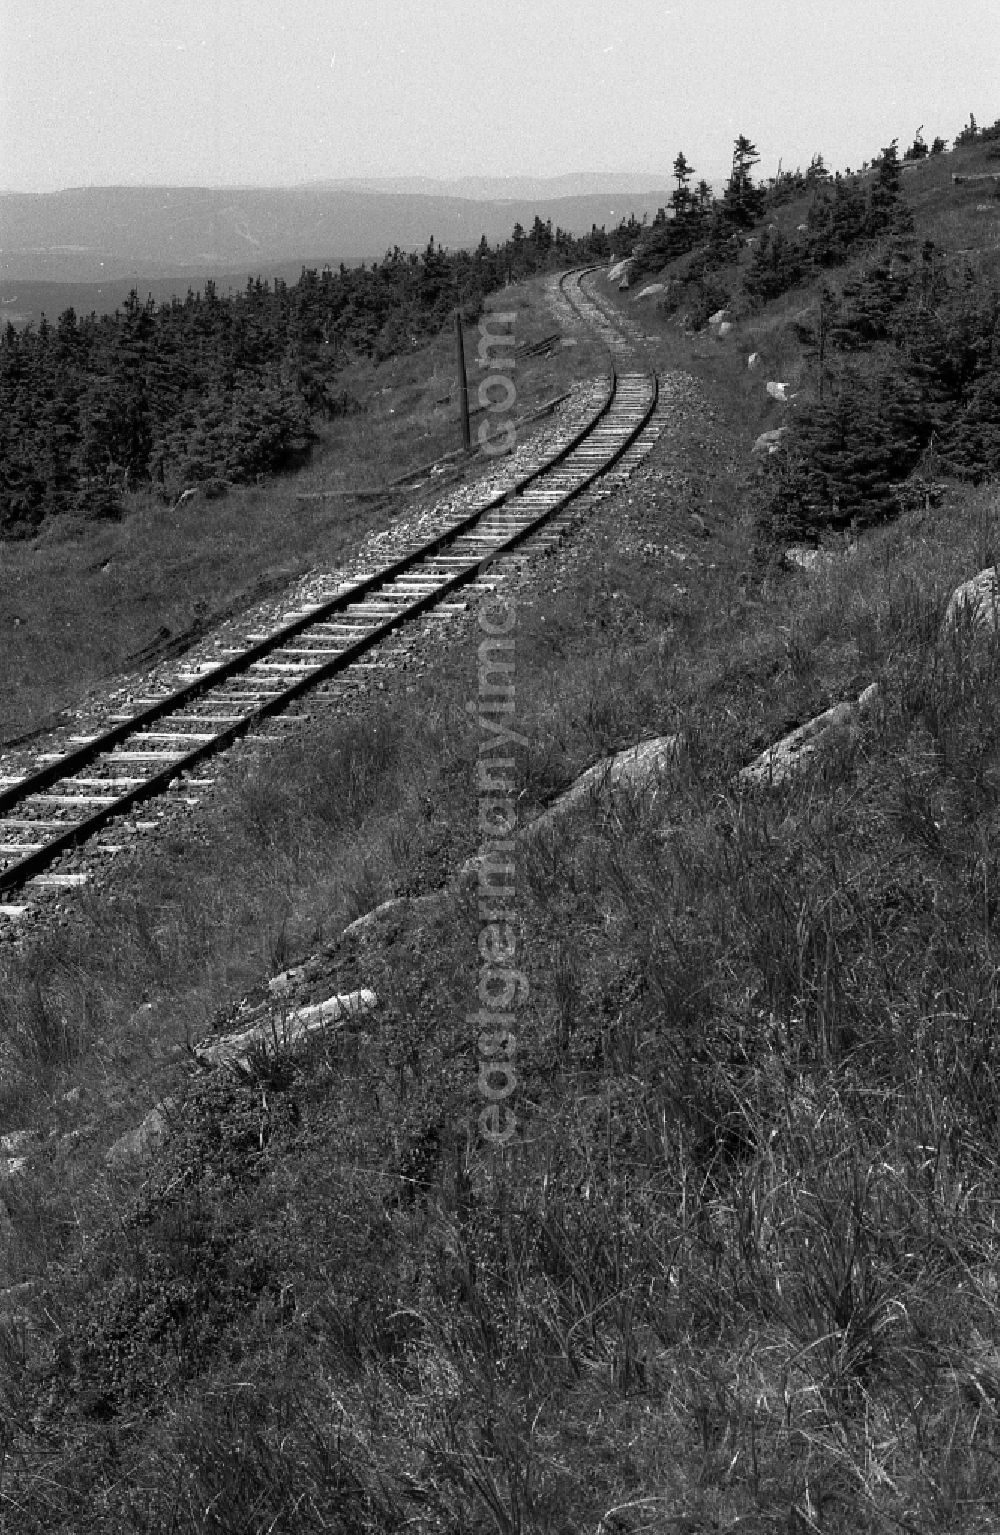 GDR photo archive: Schierke - Neglected track layout and track systems on the railway line on the summit plateau of the Brocken after its release for civilian visitor traffic in Schierke in the Harz in the state of Saxony-Anhalt in the area of the former GDR, German Democratic Republic